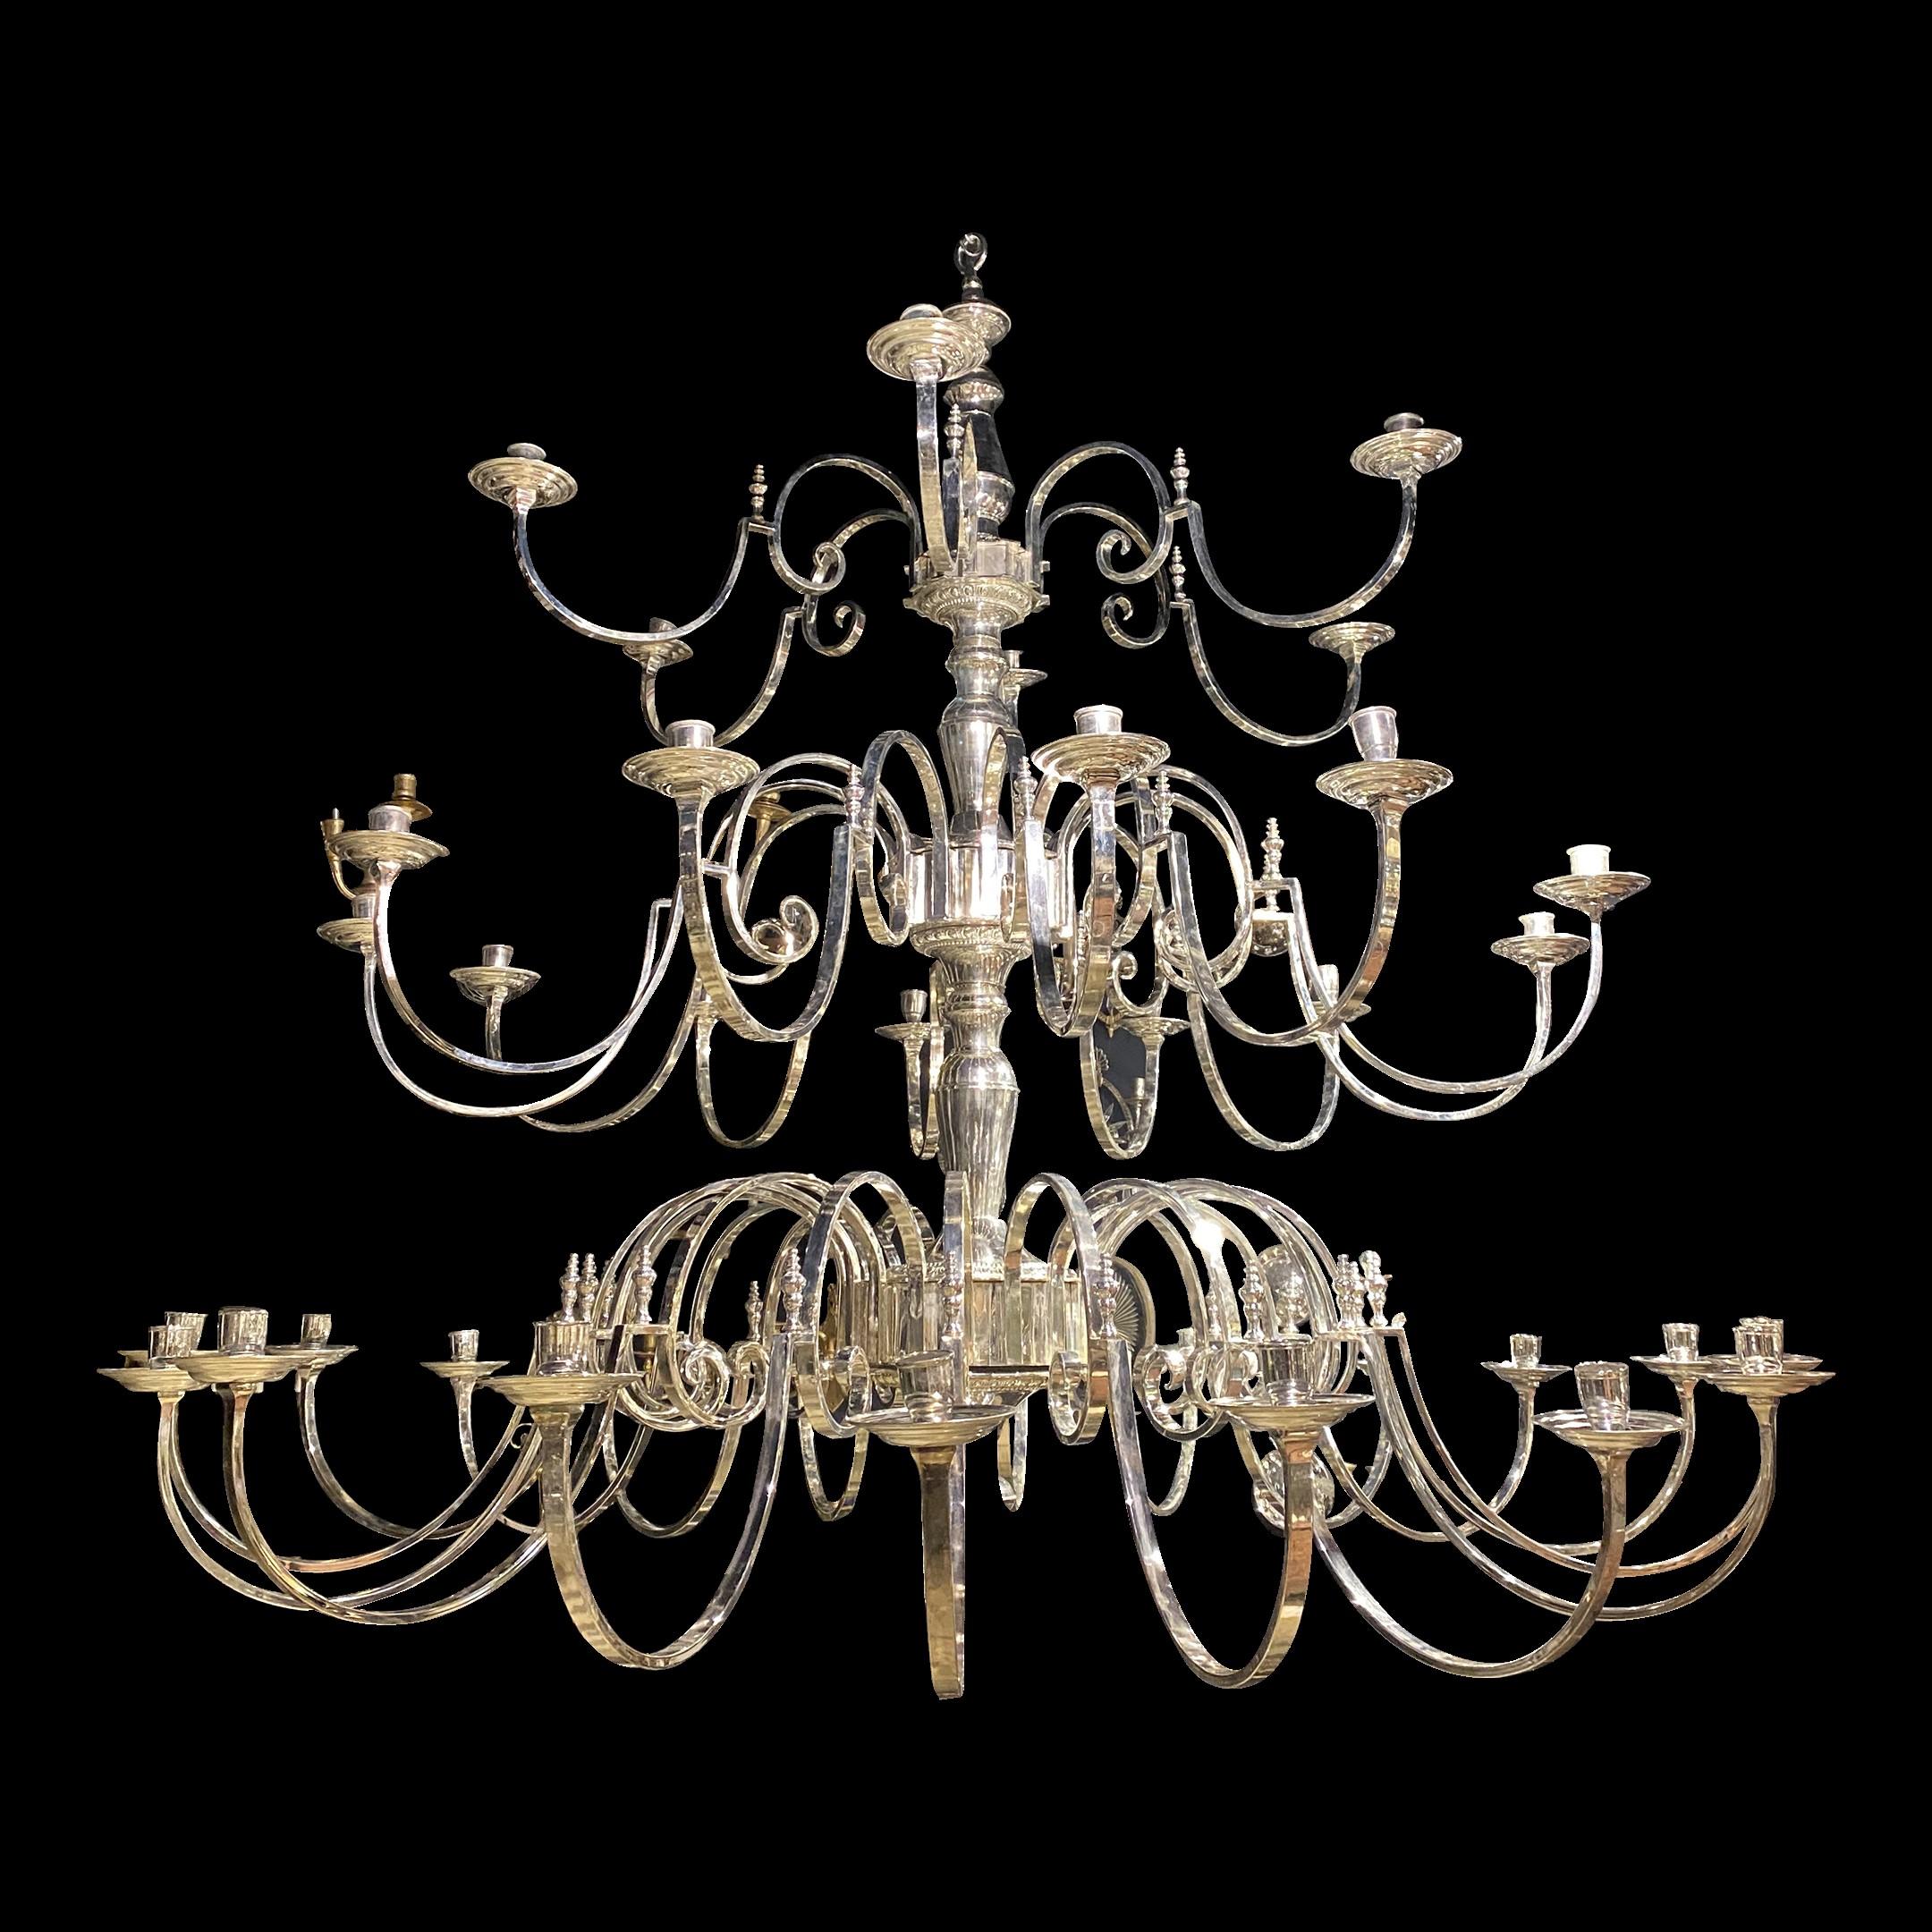 Circa 1920's silver plated bronze chandelier with 36 lights. Beautiful large chandelier in very good condition. Available two cahndelier as a pair  